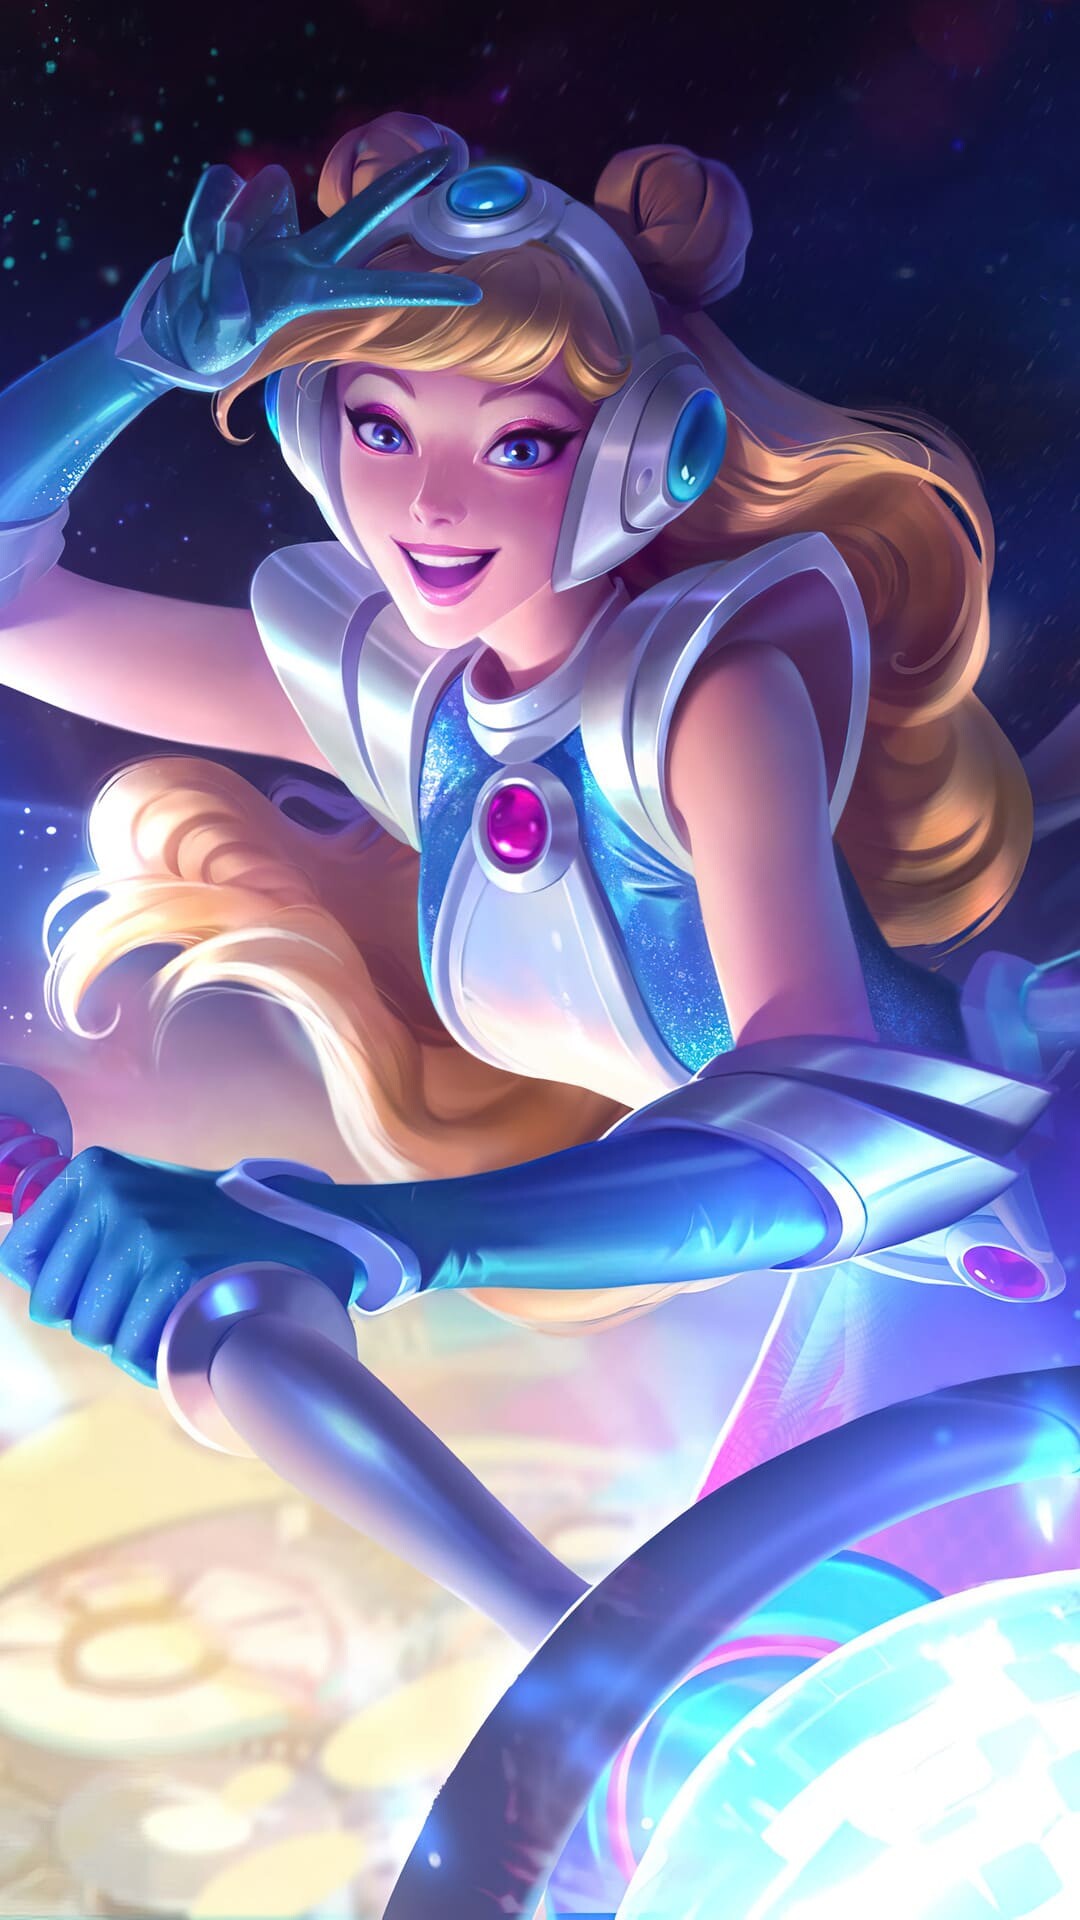 League of Legends: Lux, the Lady of Luminosity, Mage, Burst, Artillery. 1080x1920 Full HD Background.